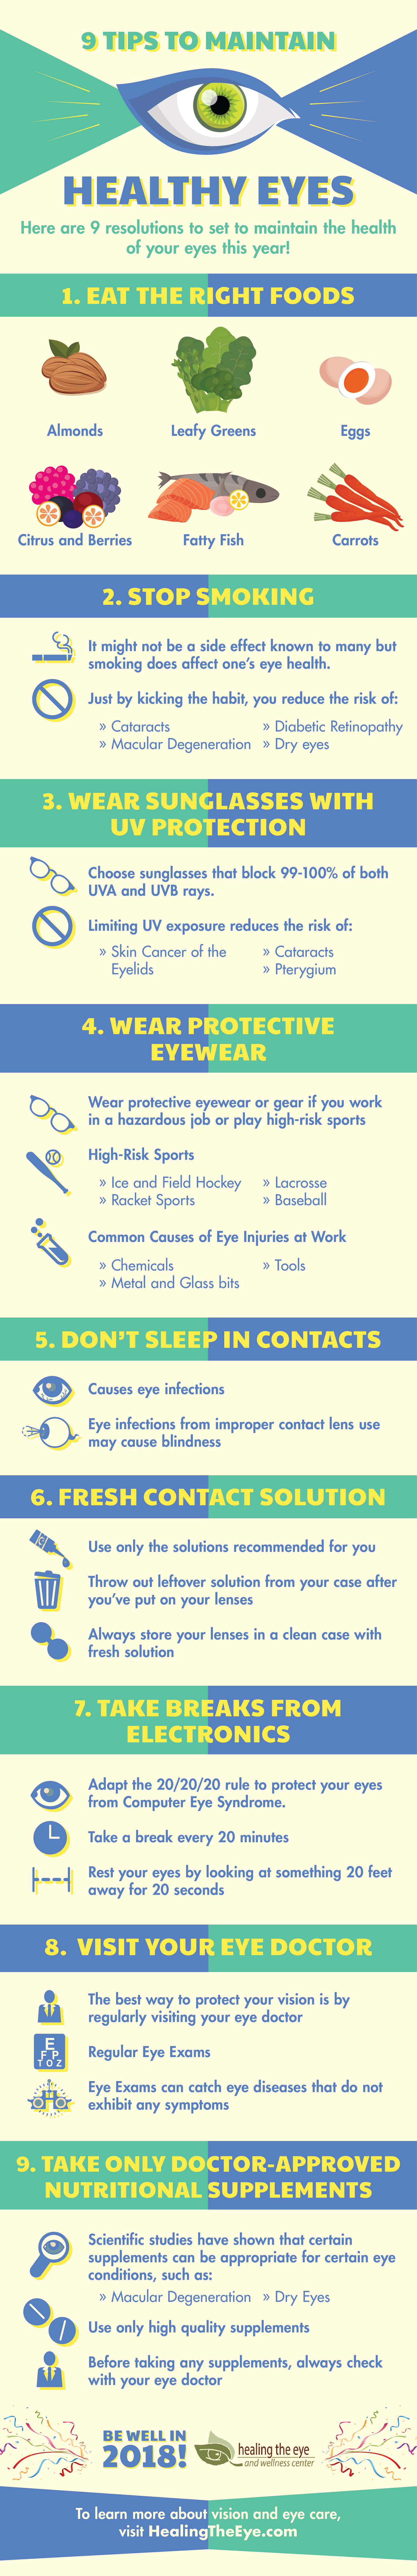 How To Maintain Healthy Eyes | Follow These Easy Tips | How To Maintain Healthy Eyes | Useful Tips